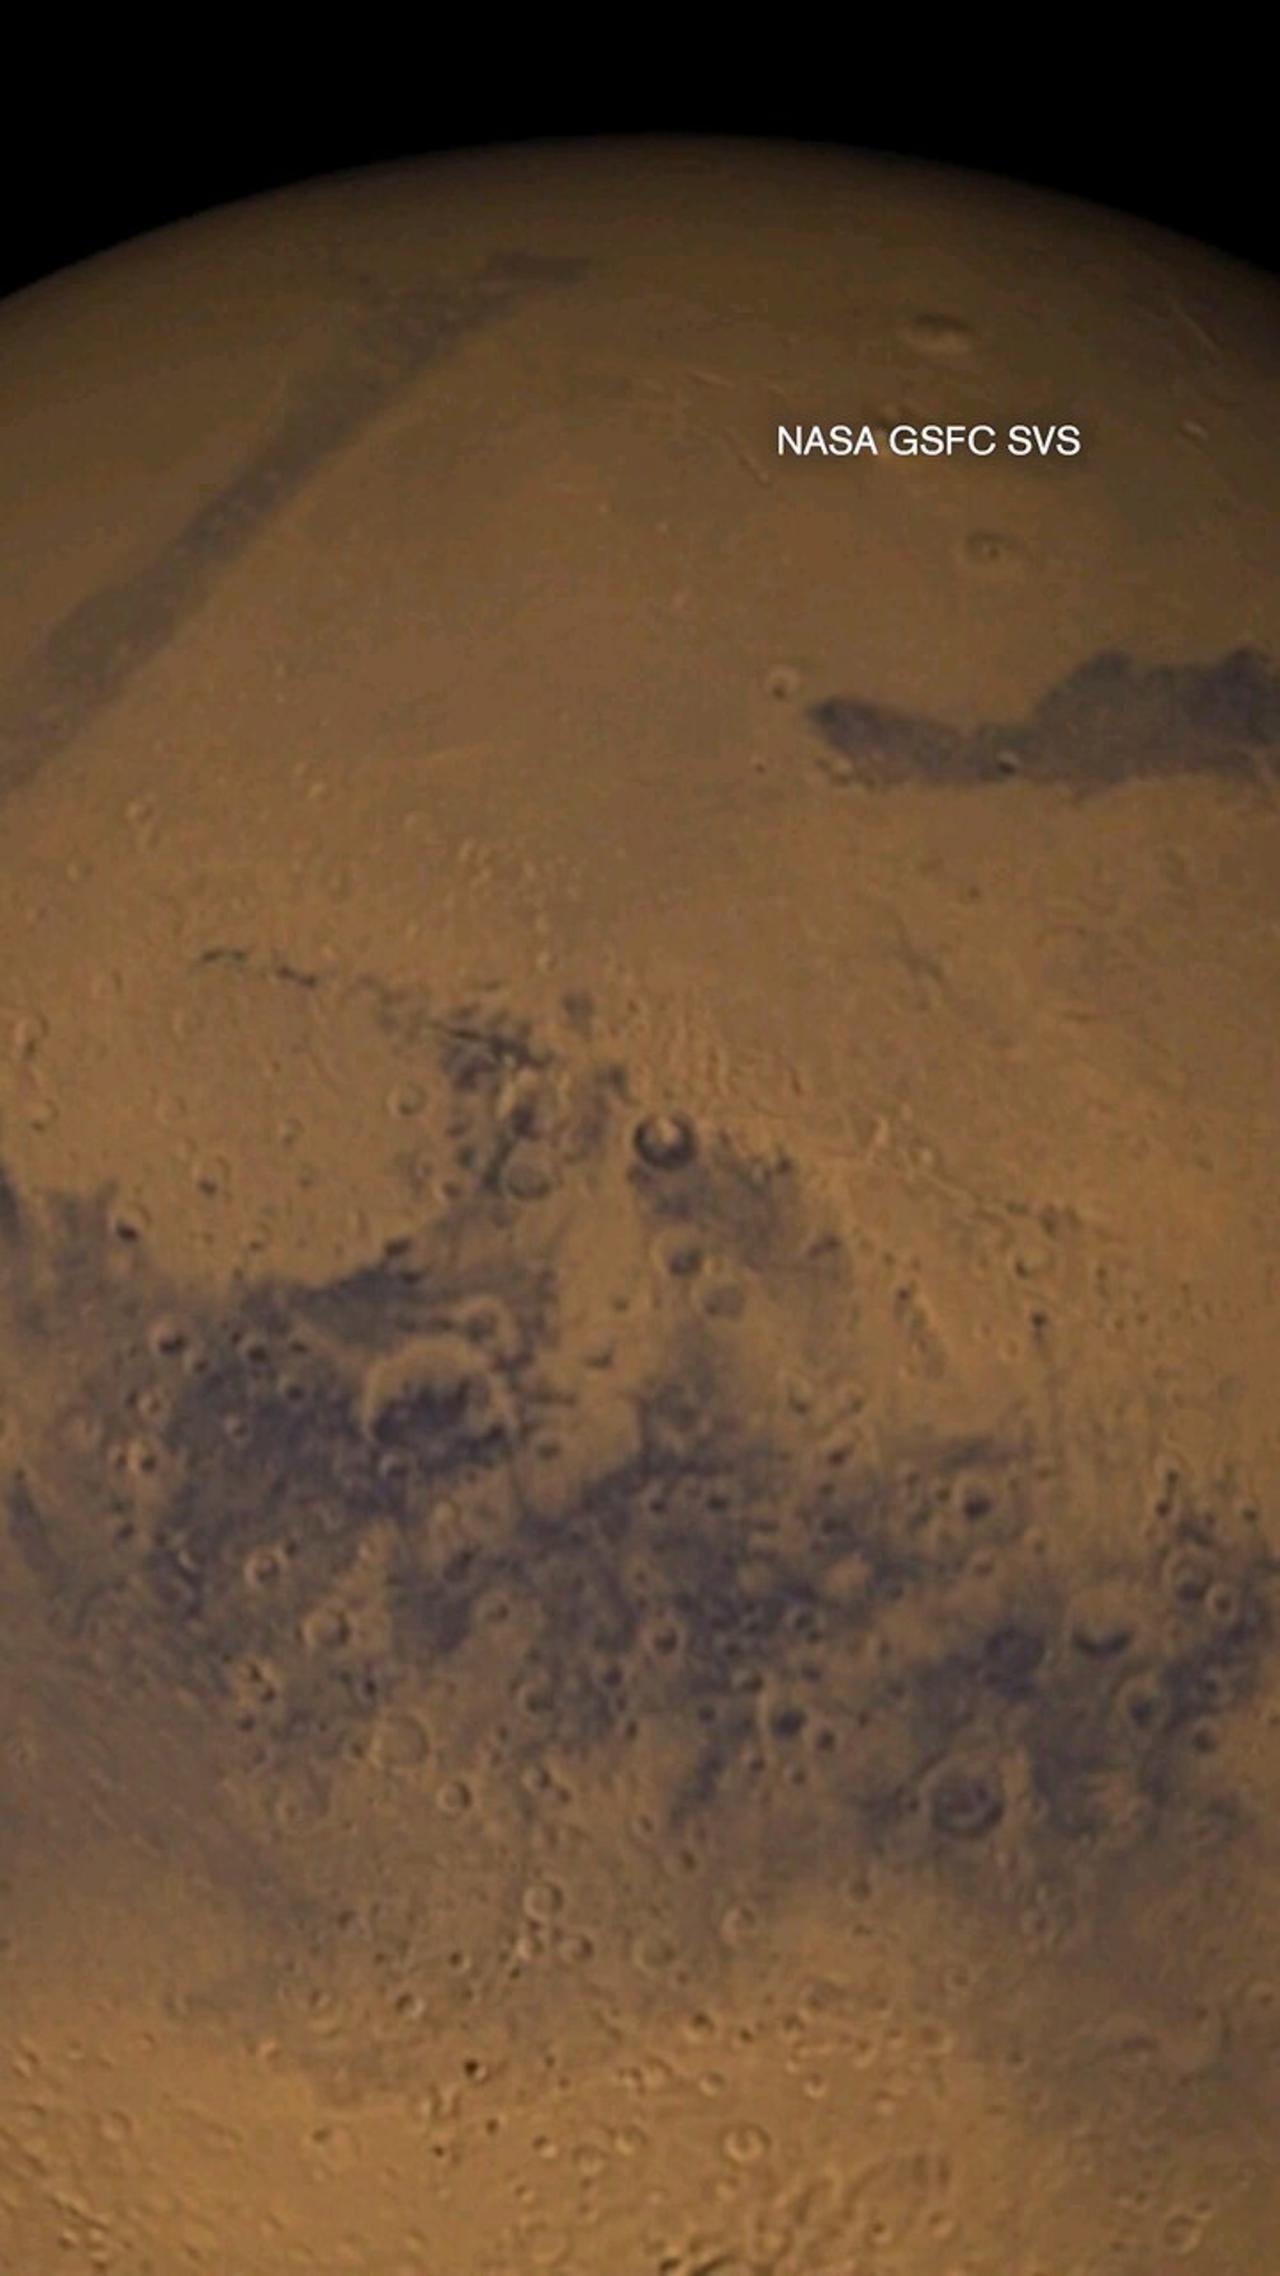 New Evidence of Water on Mars Thanks to NASA Curiosity Rover Discovery | Spacing Out